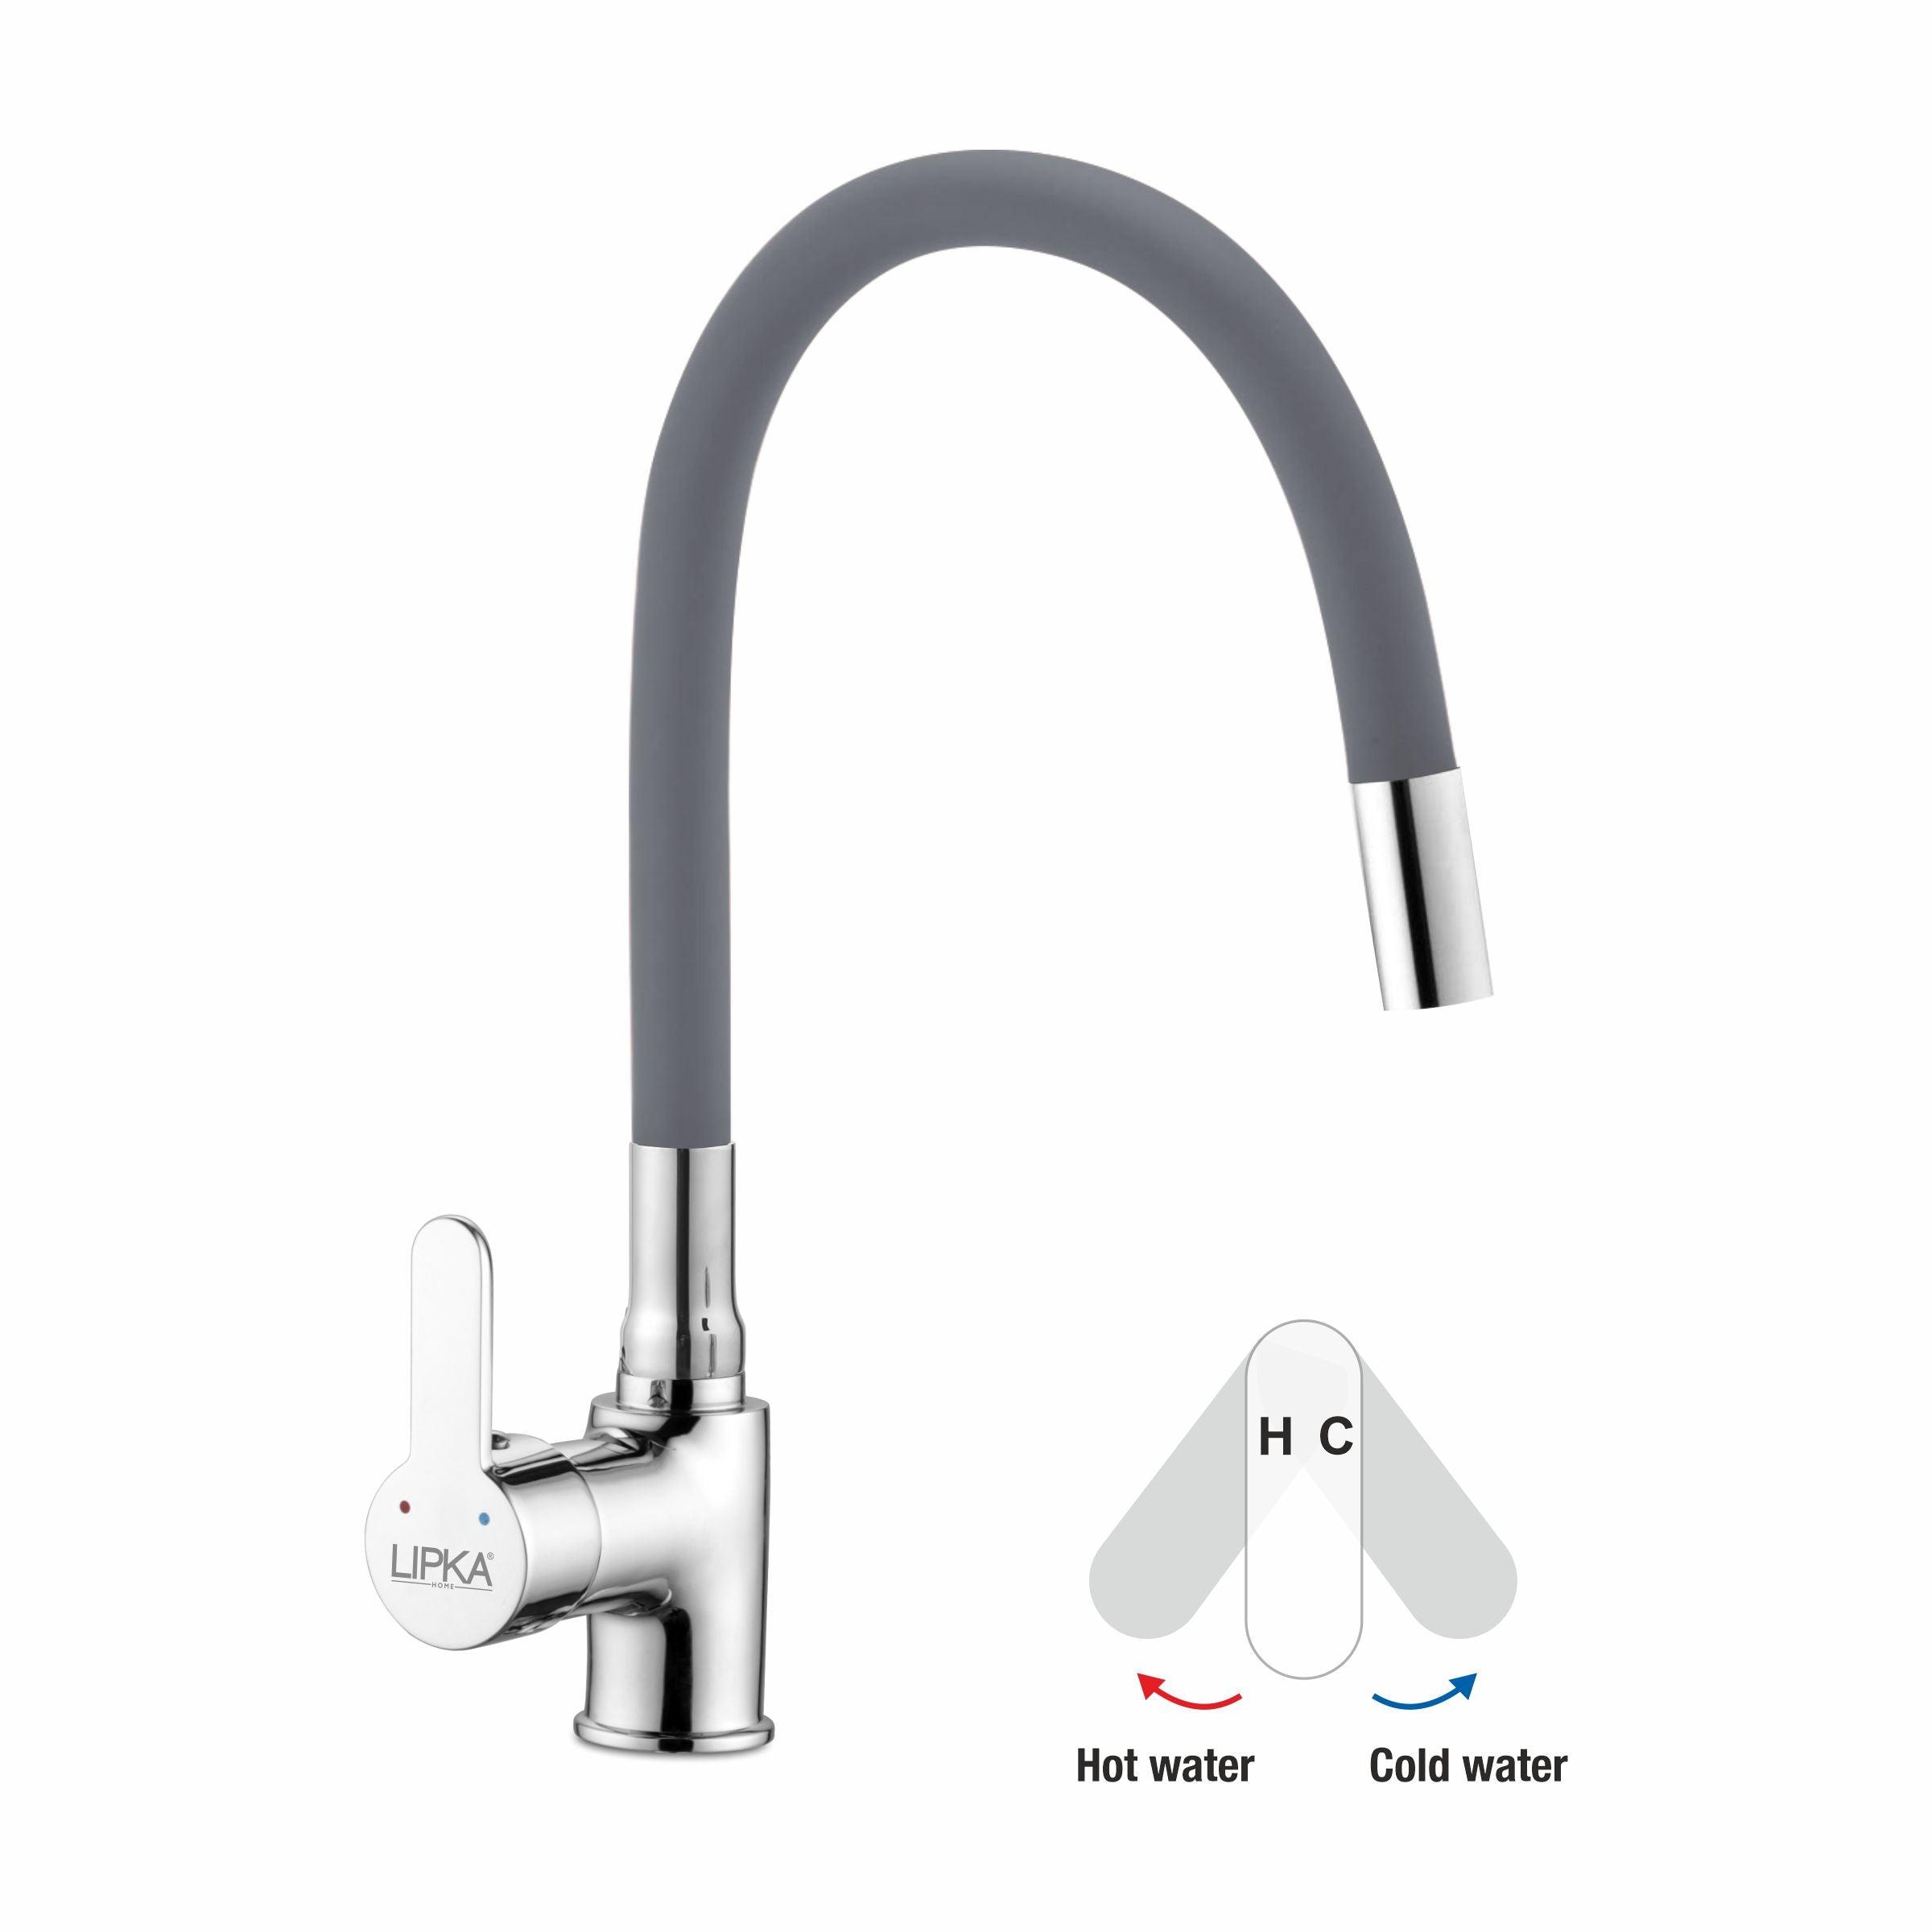 Fusion Single Lever Table Mount Sink Mixer Brass Faucet with Flexible Silicone Spout (Grey) - LIPKA - Lipka Home